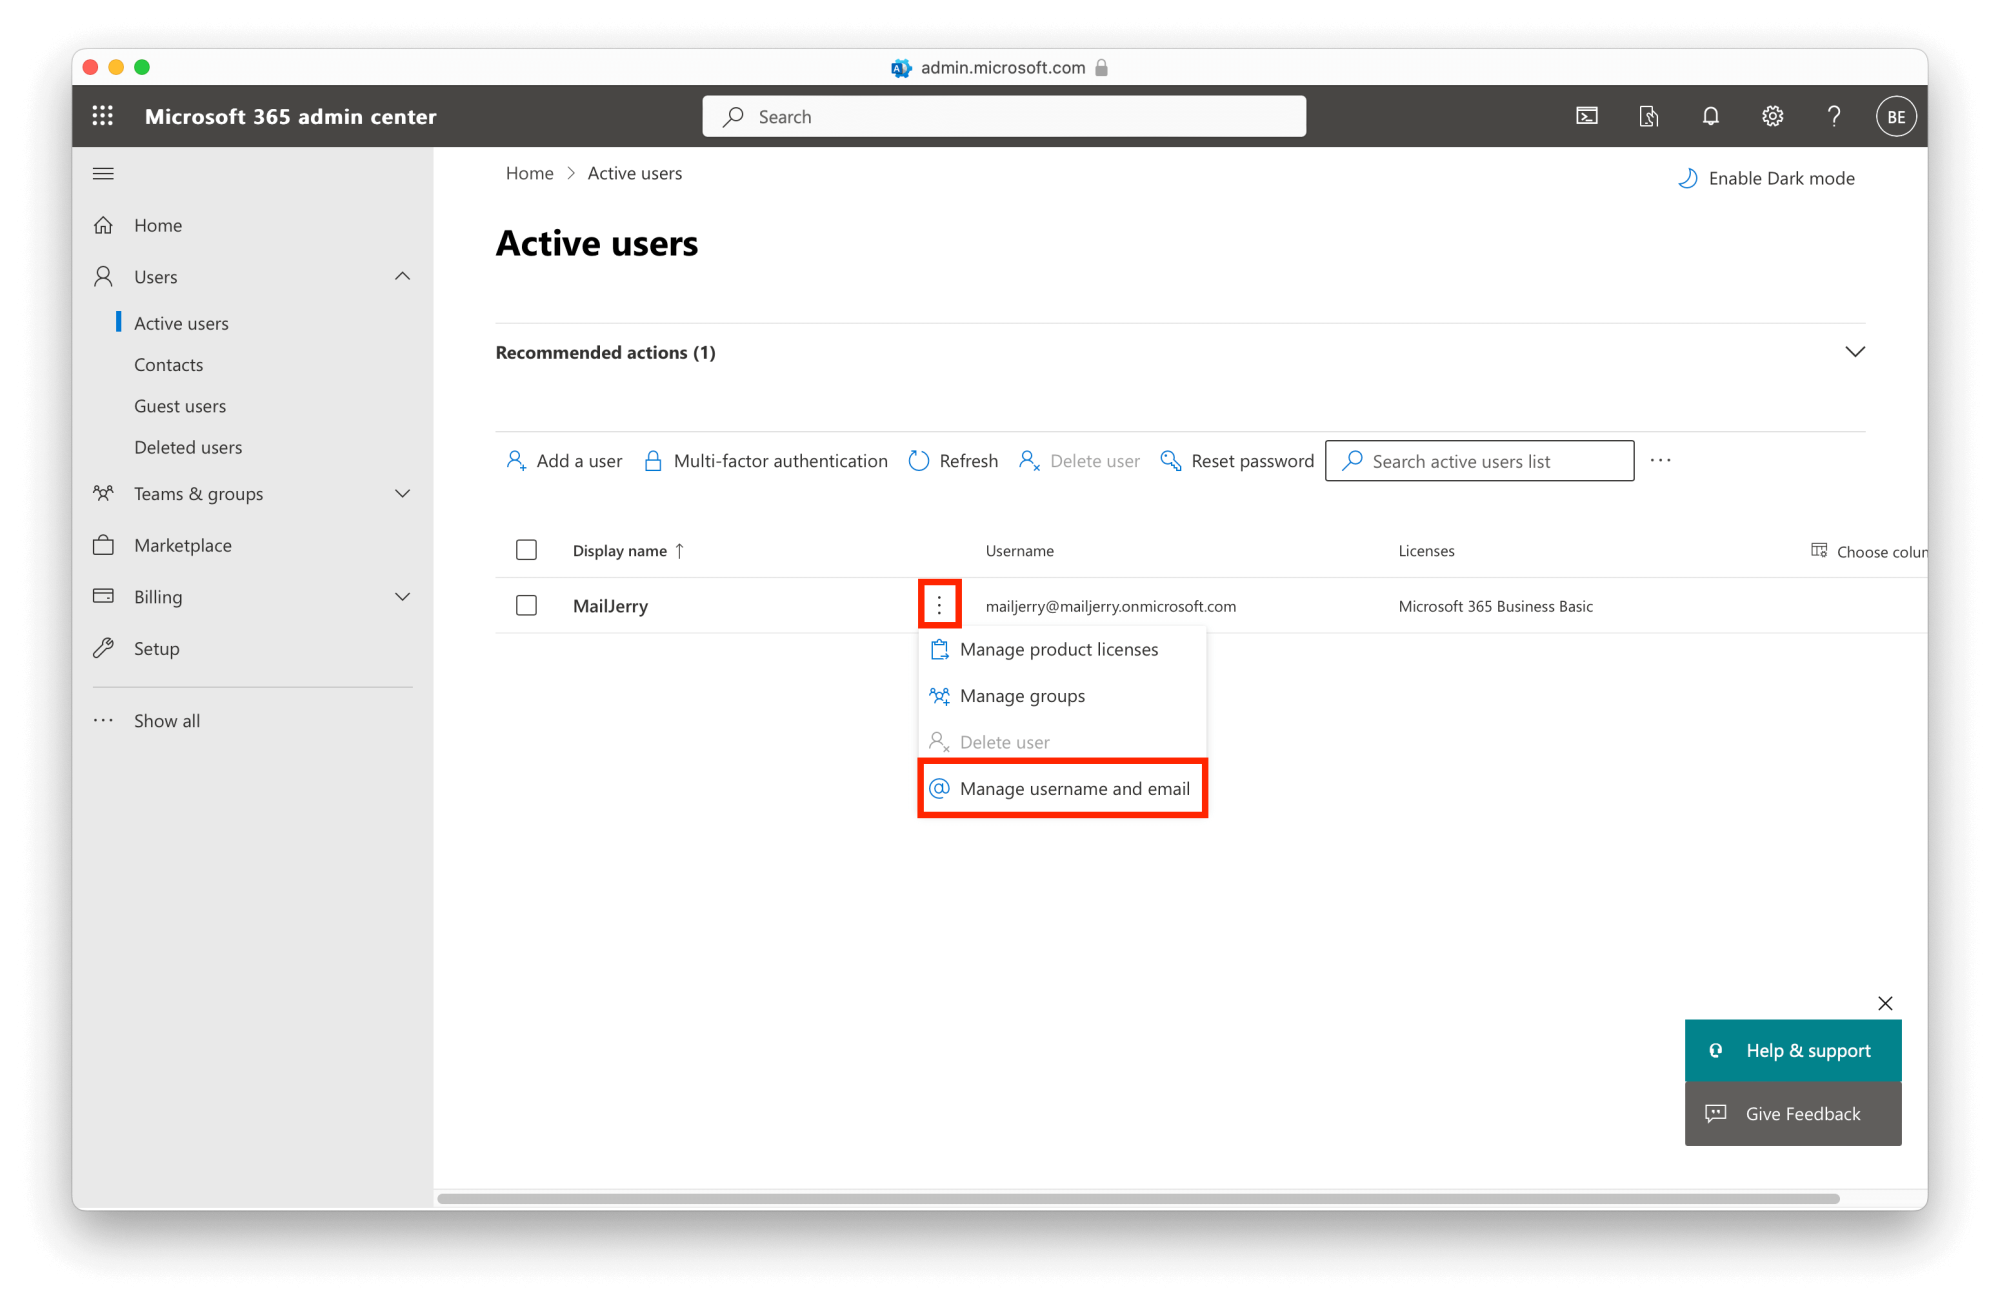 Migrate from GoDaddy to Office 365: Manage Username and Email